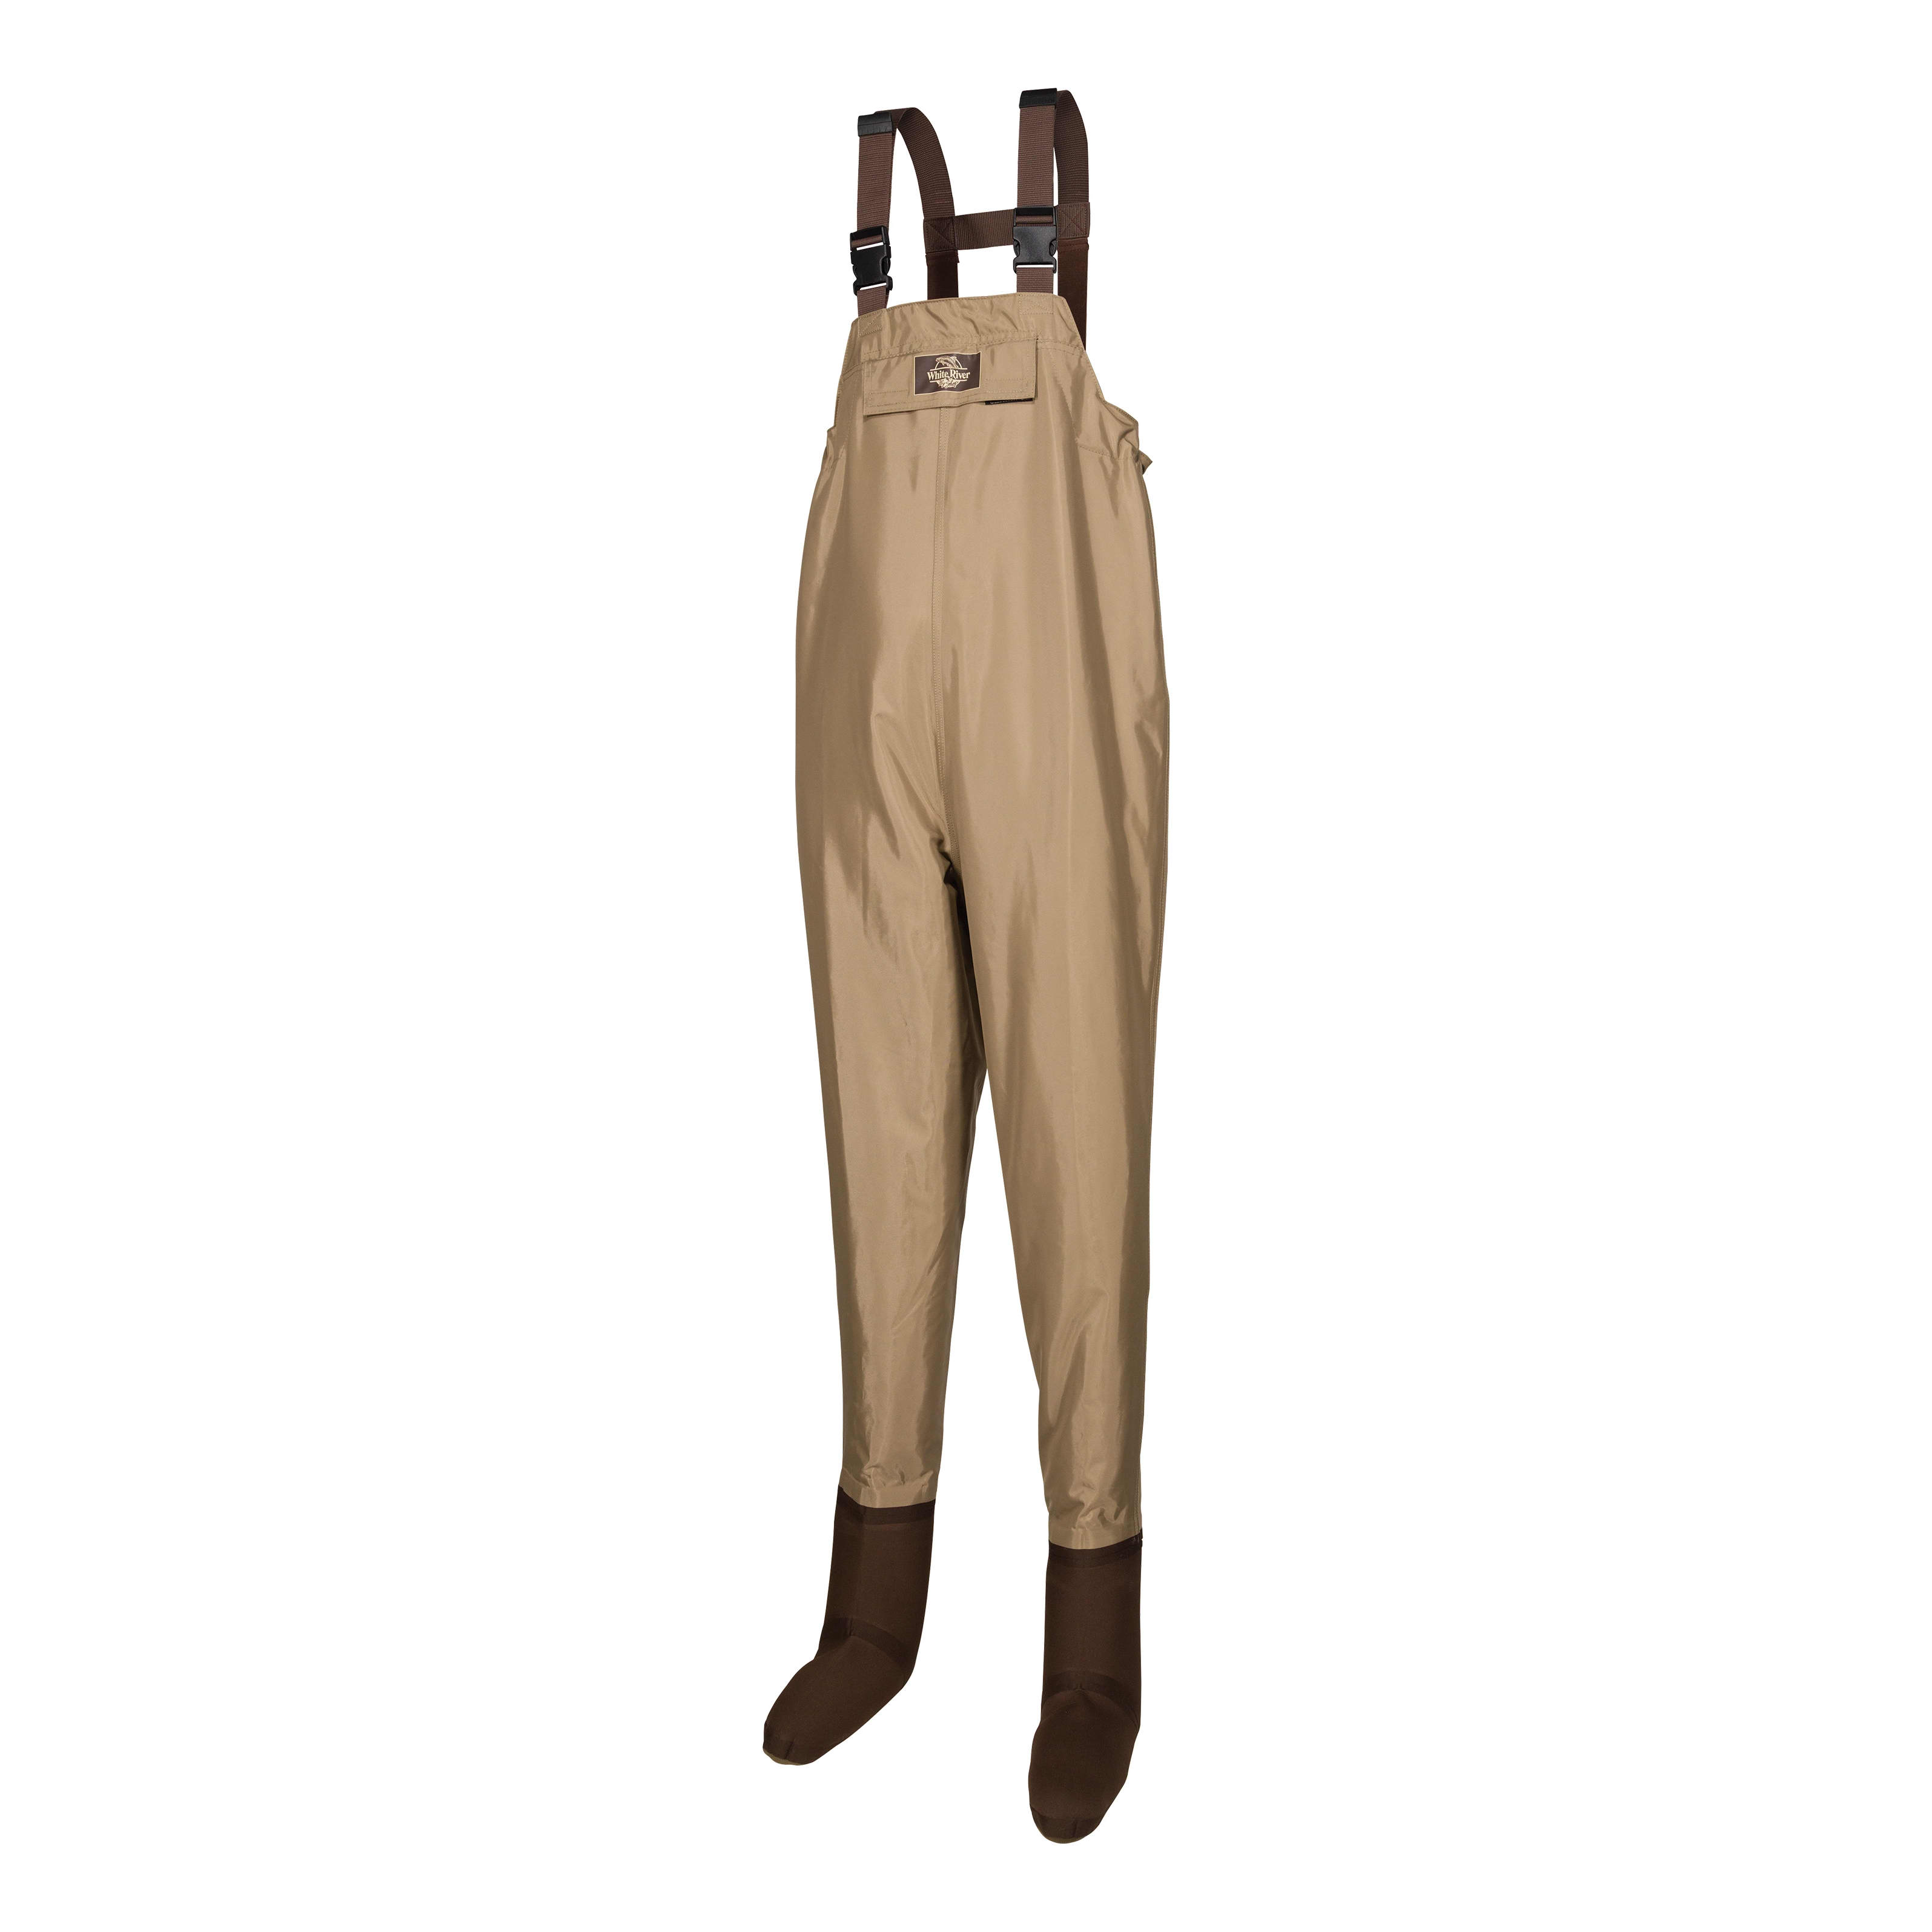 MOUNTALK High Chest Waders for Men with Boots, India | Ubuy